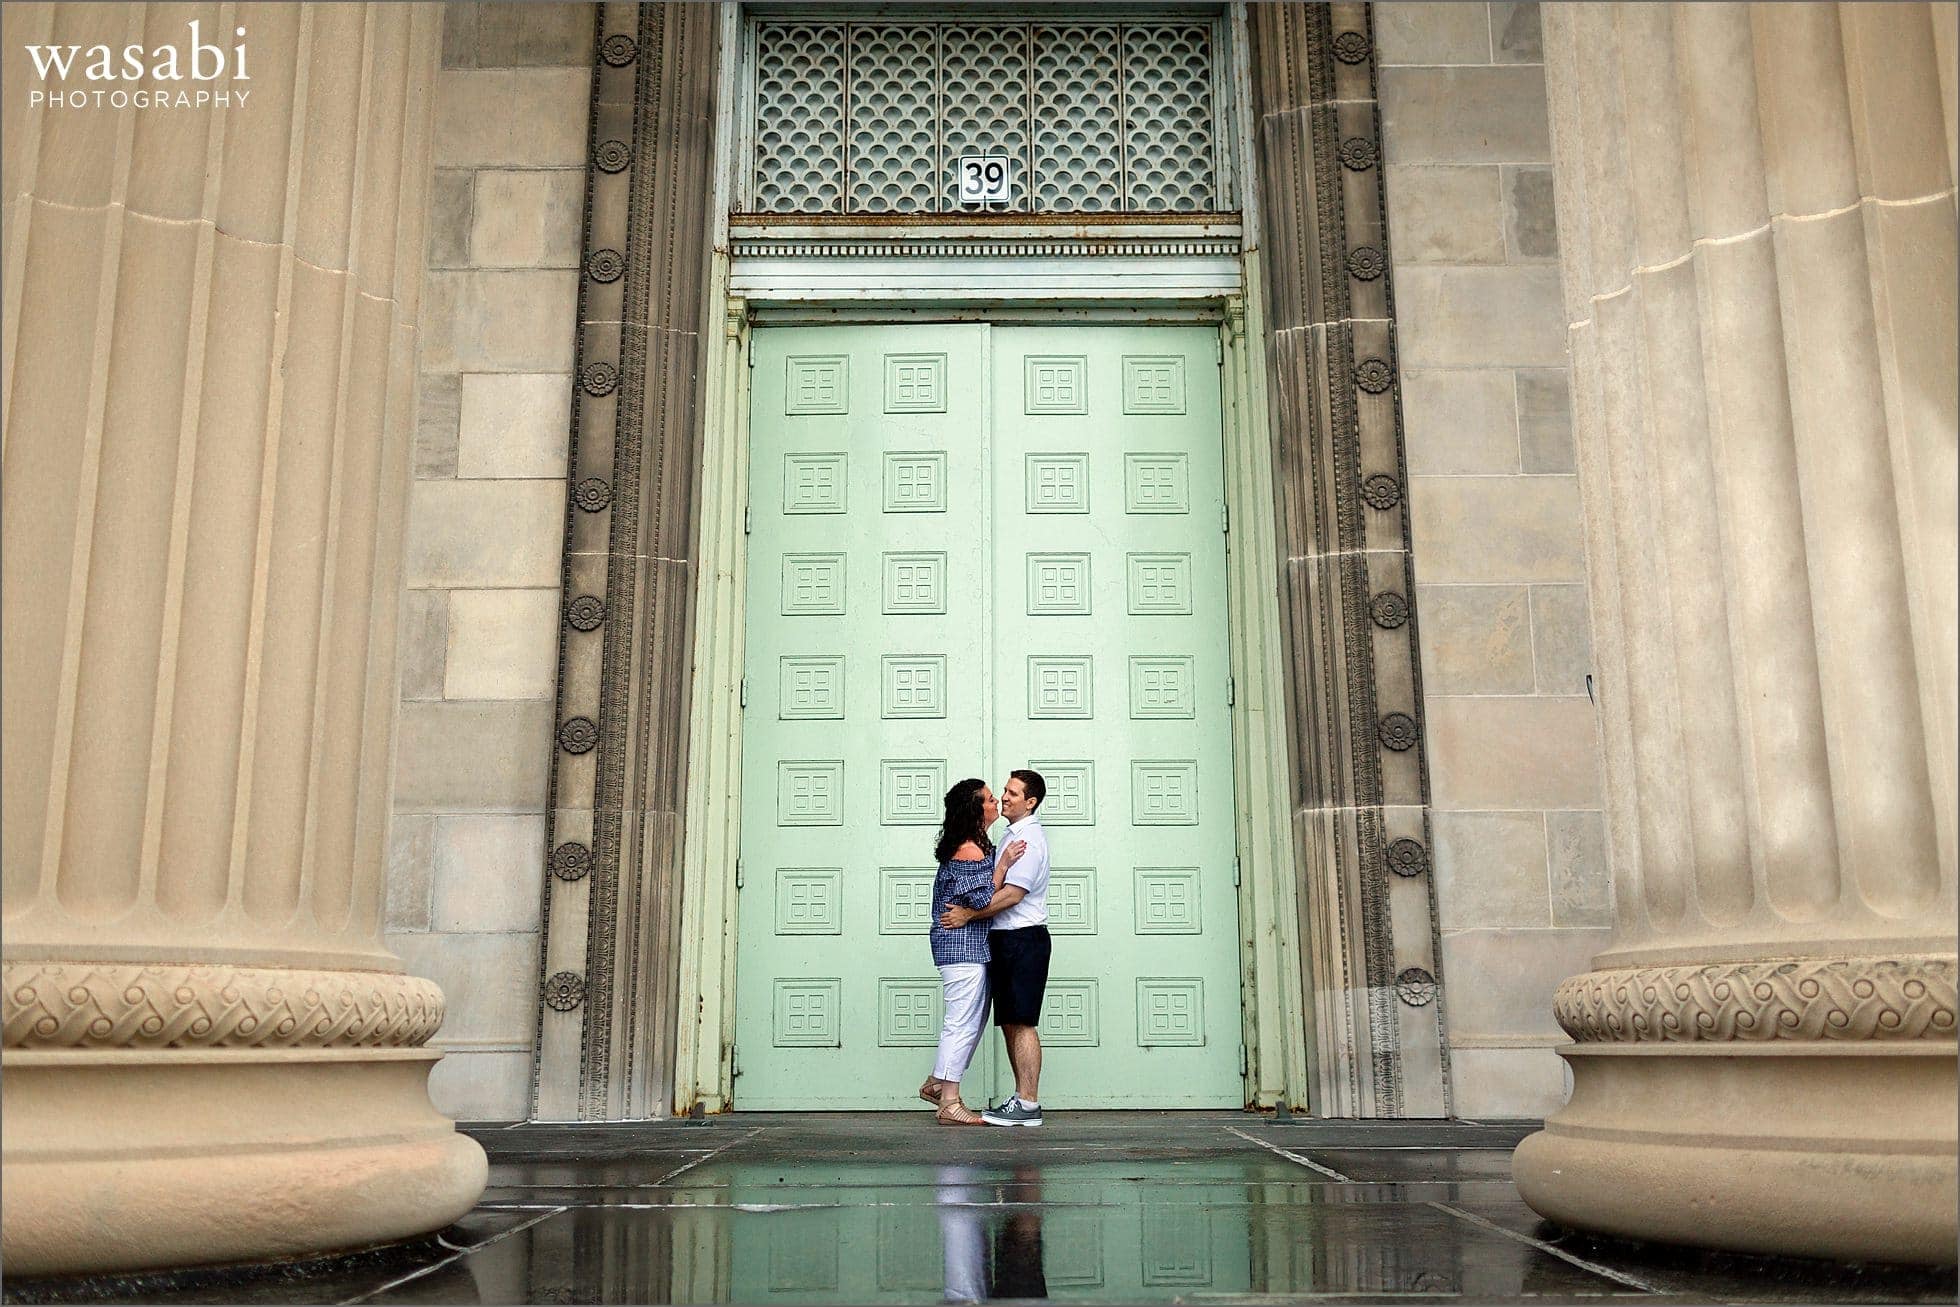 A couple laughs during their engagement session at The Museum of Science and Industry near Chicagos Jackson Park and Hyde Park neighborhood between Lake Michigan and The University of Chicago.